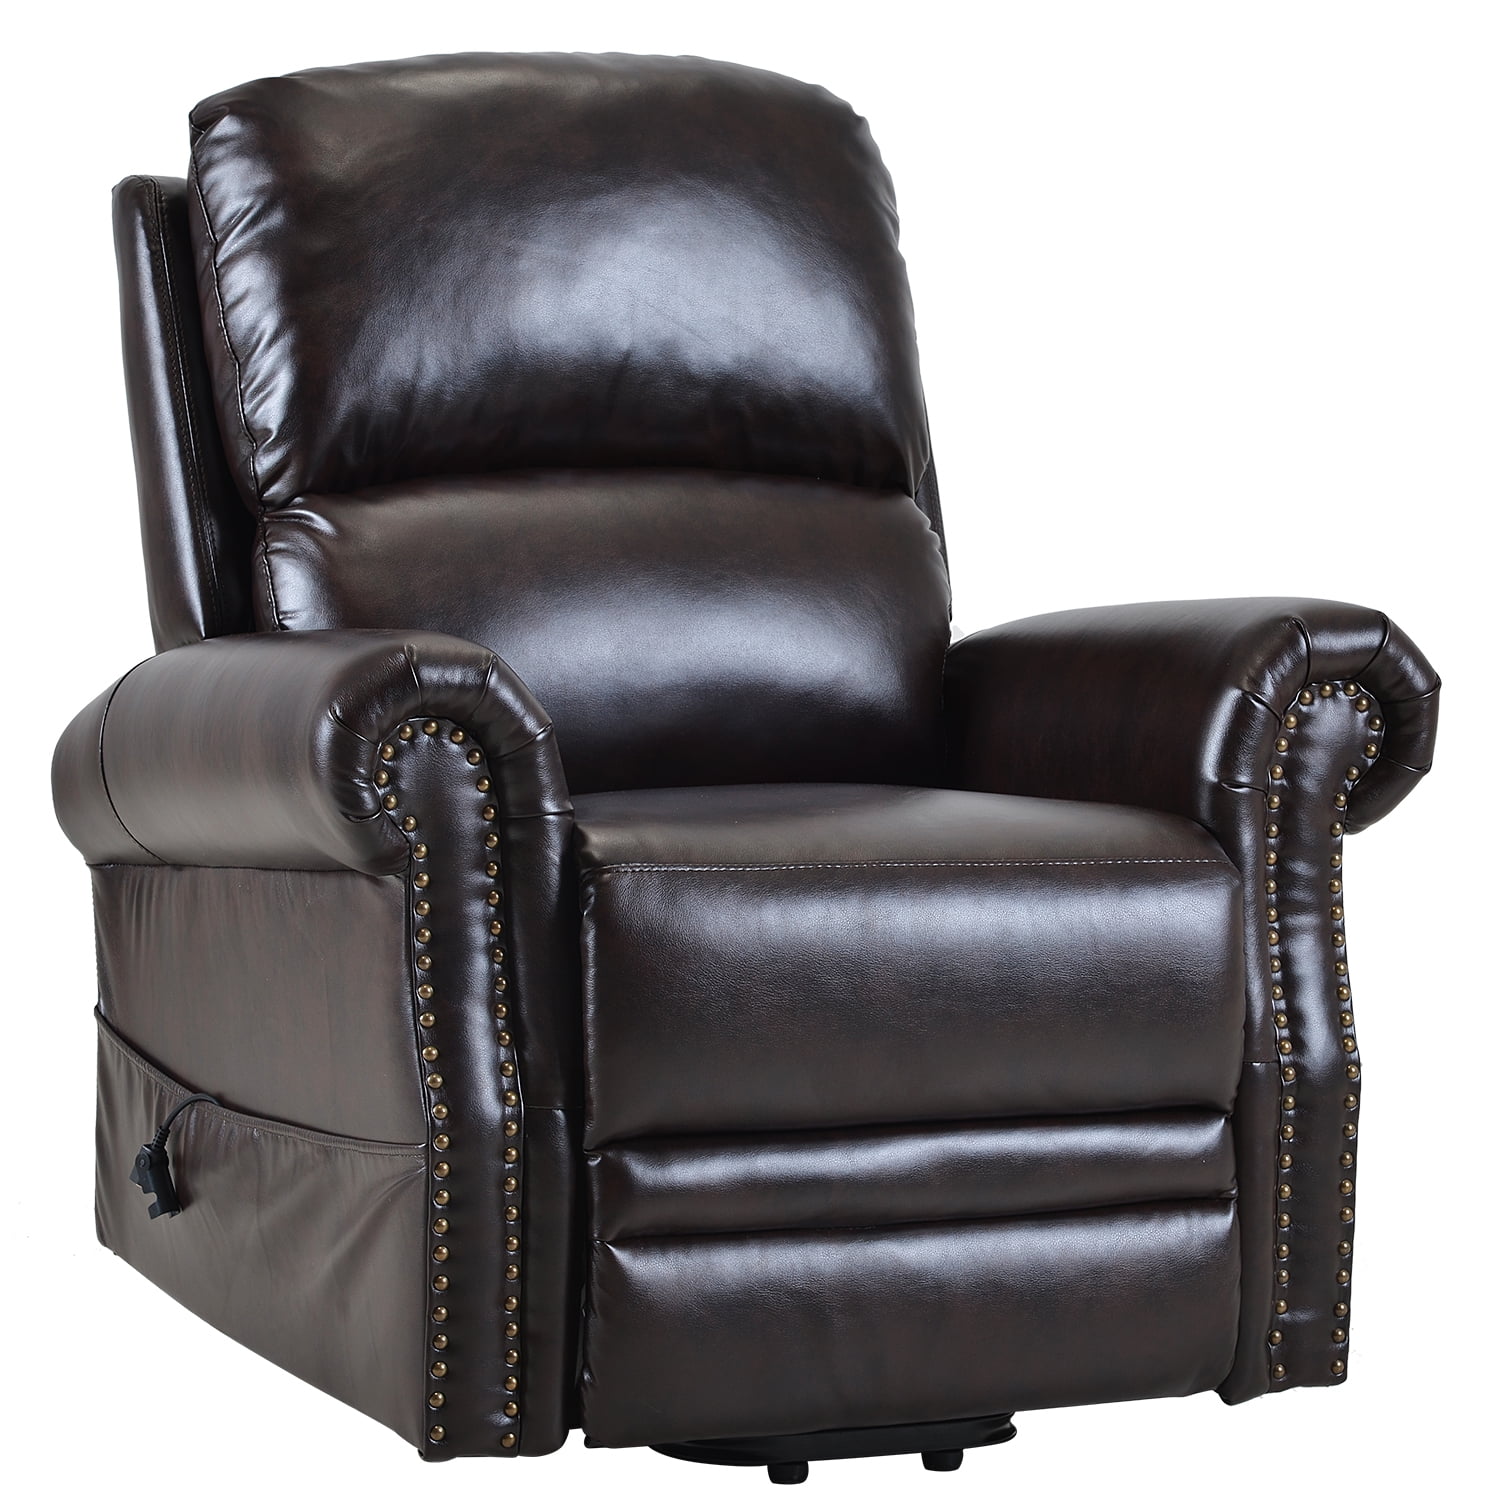 leather lift chairs